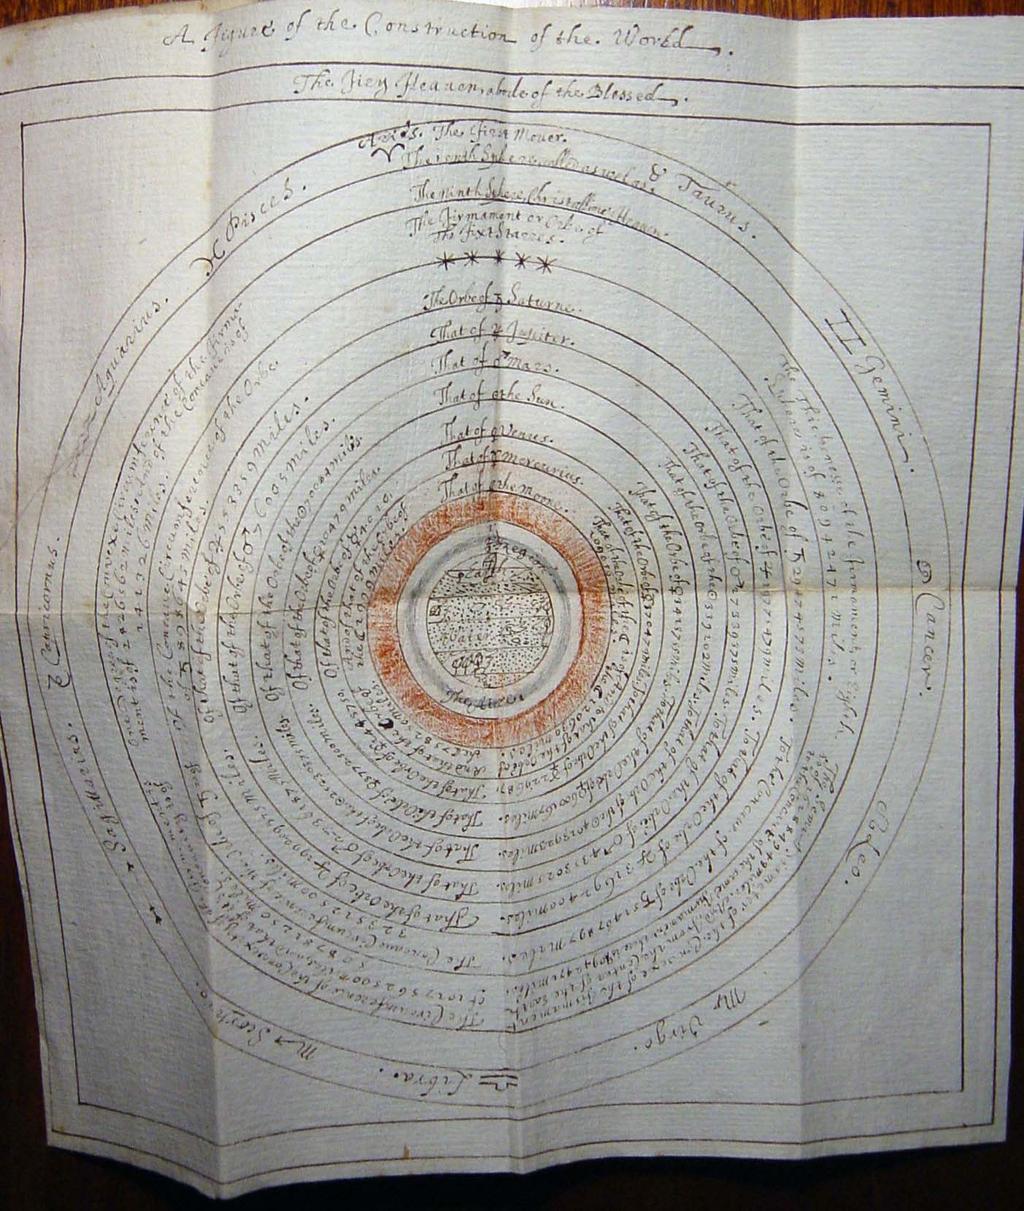 Robert Boyle made his own cosmological diagram, and copied it into the student notebook that he made when he was a student at Geneva in the 1640s.